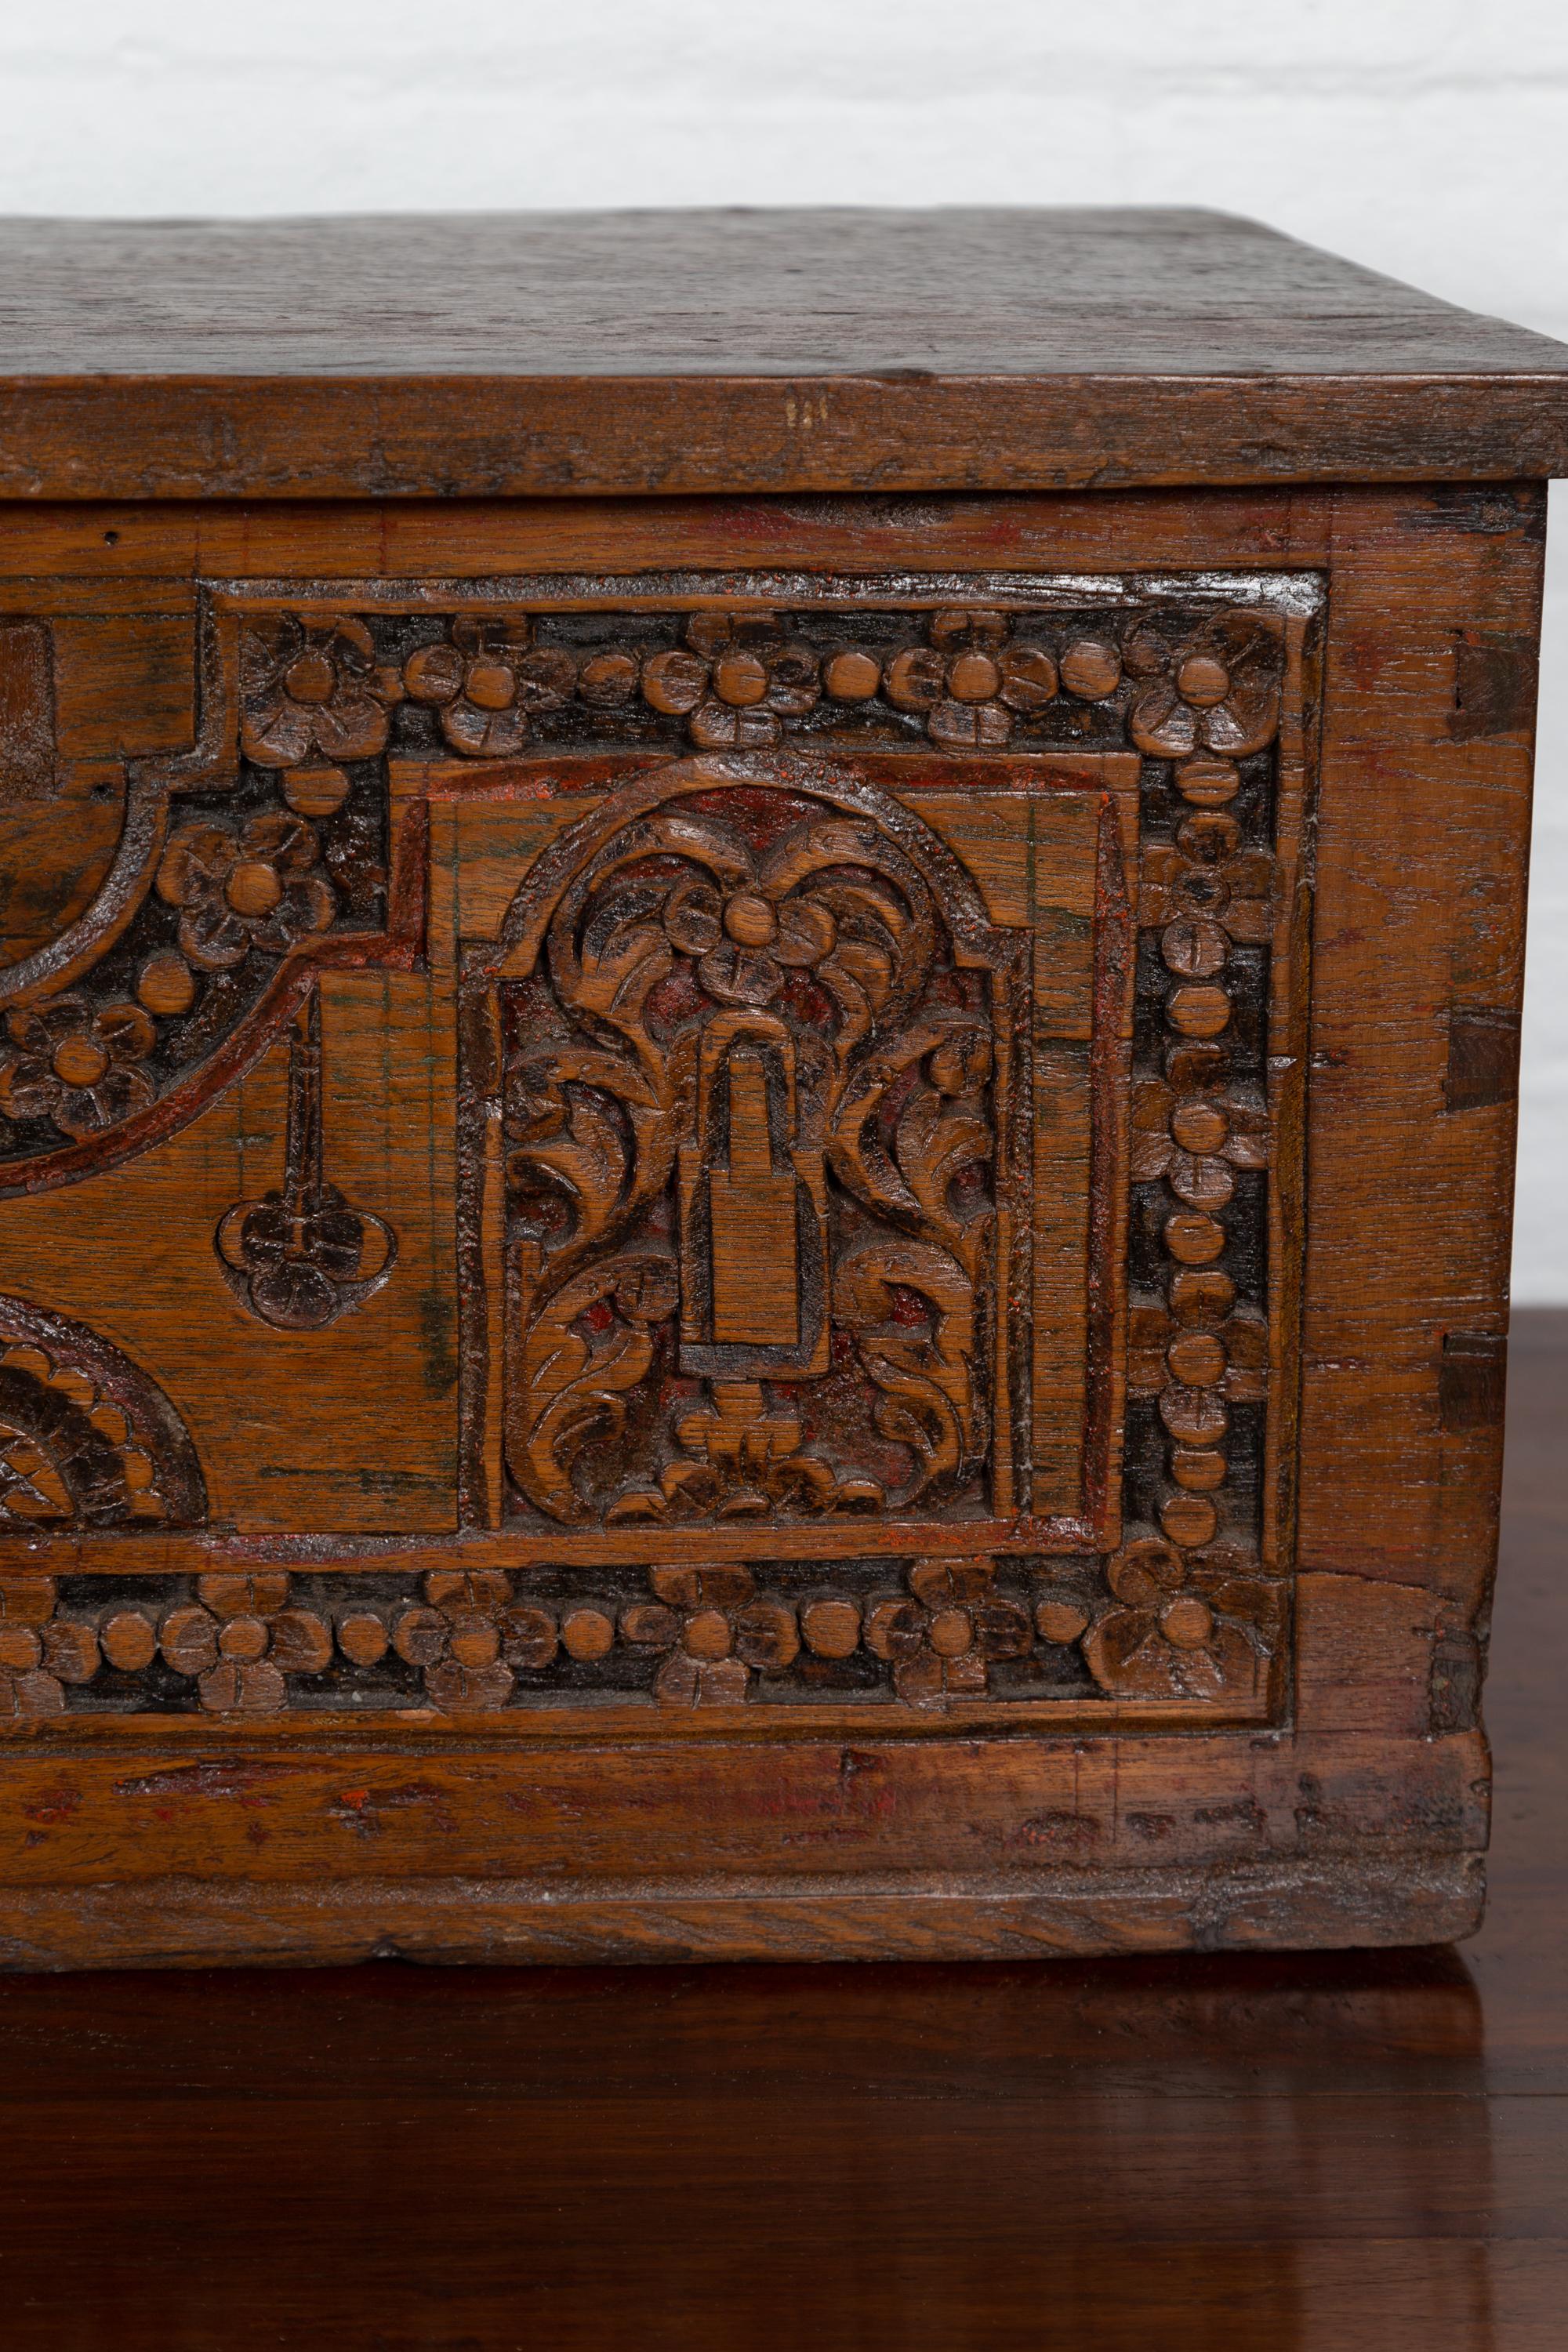 Antique Indonesian Decorative Wooden Box with Carved Flowers and Architecture In Good Condition For Sale In Yonkers, NY